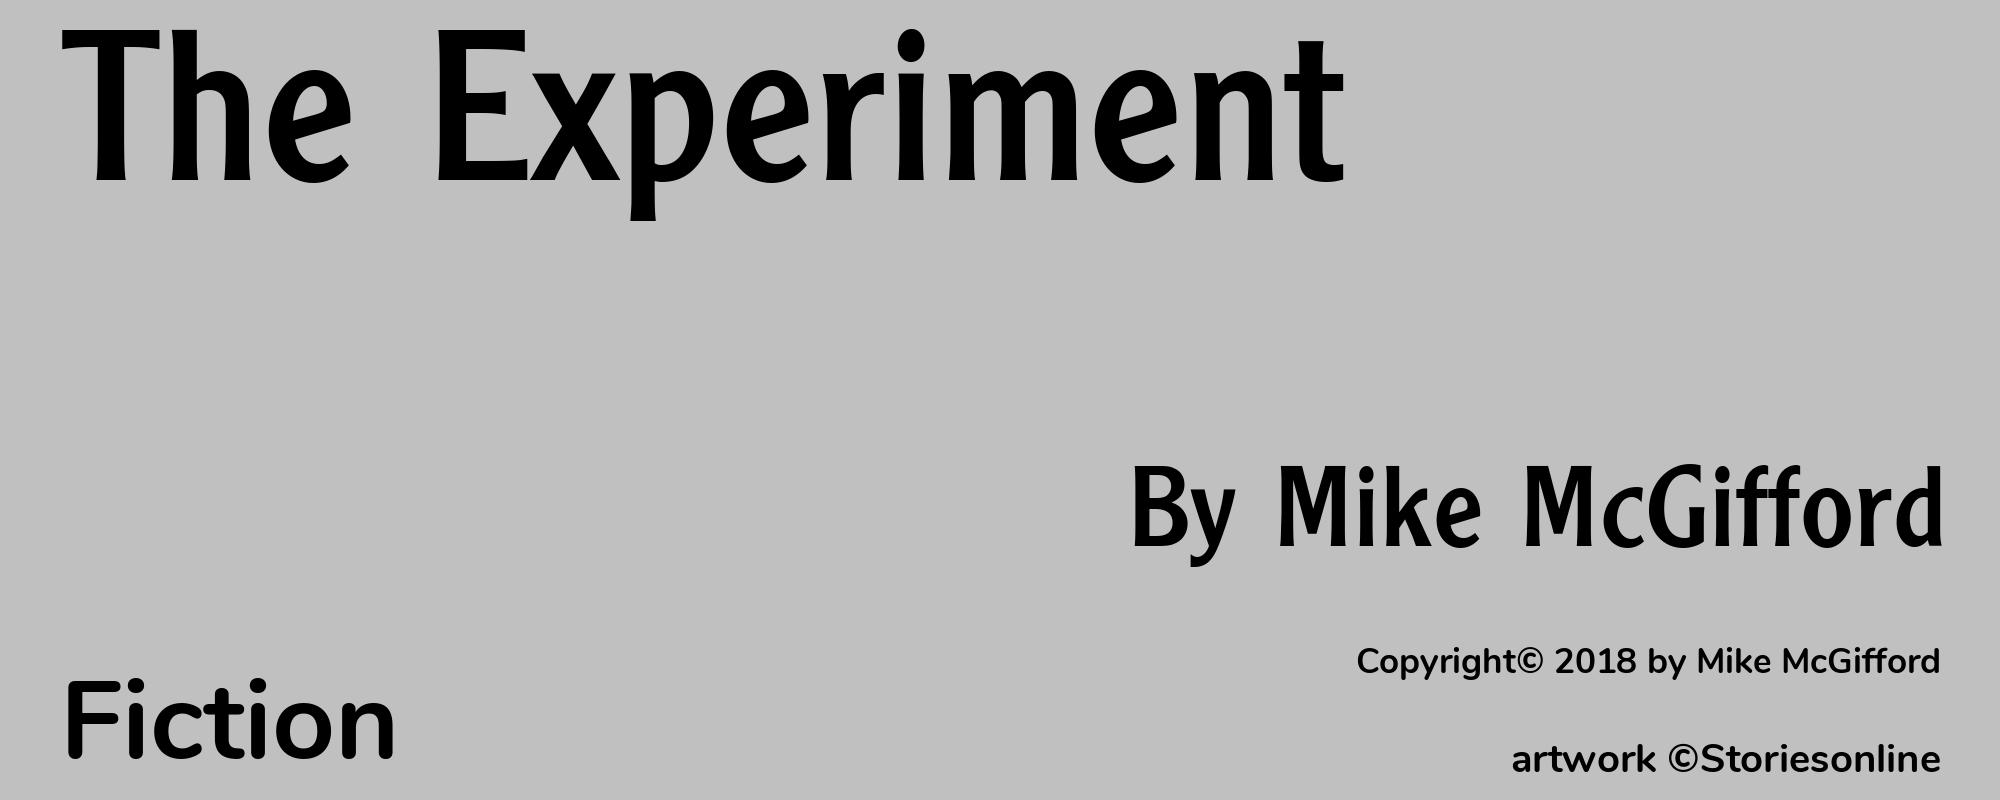 The Experiment - Cover